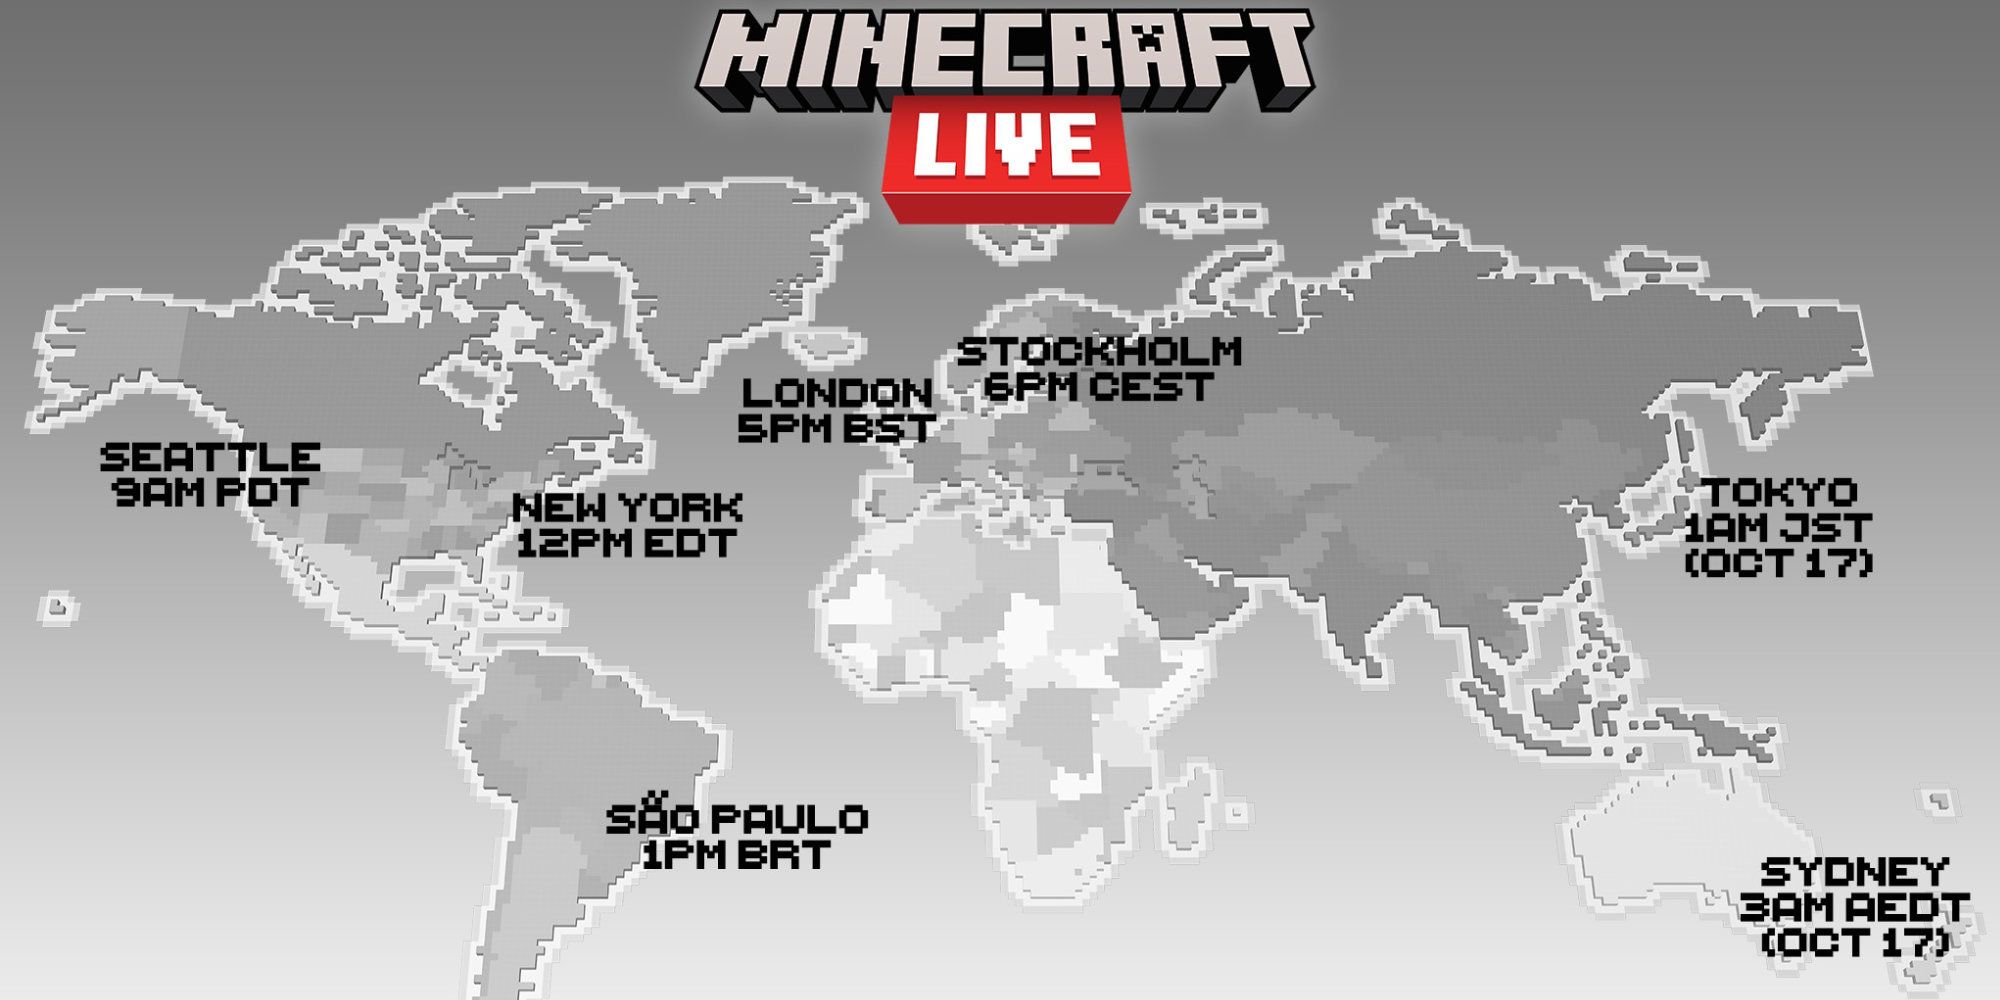 Minecraft Live timezone start times on a map